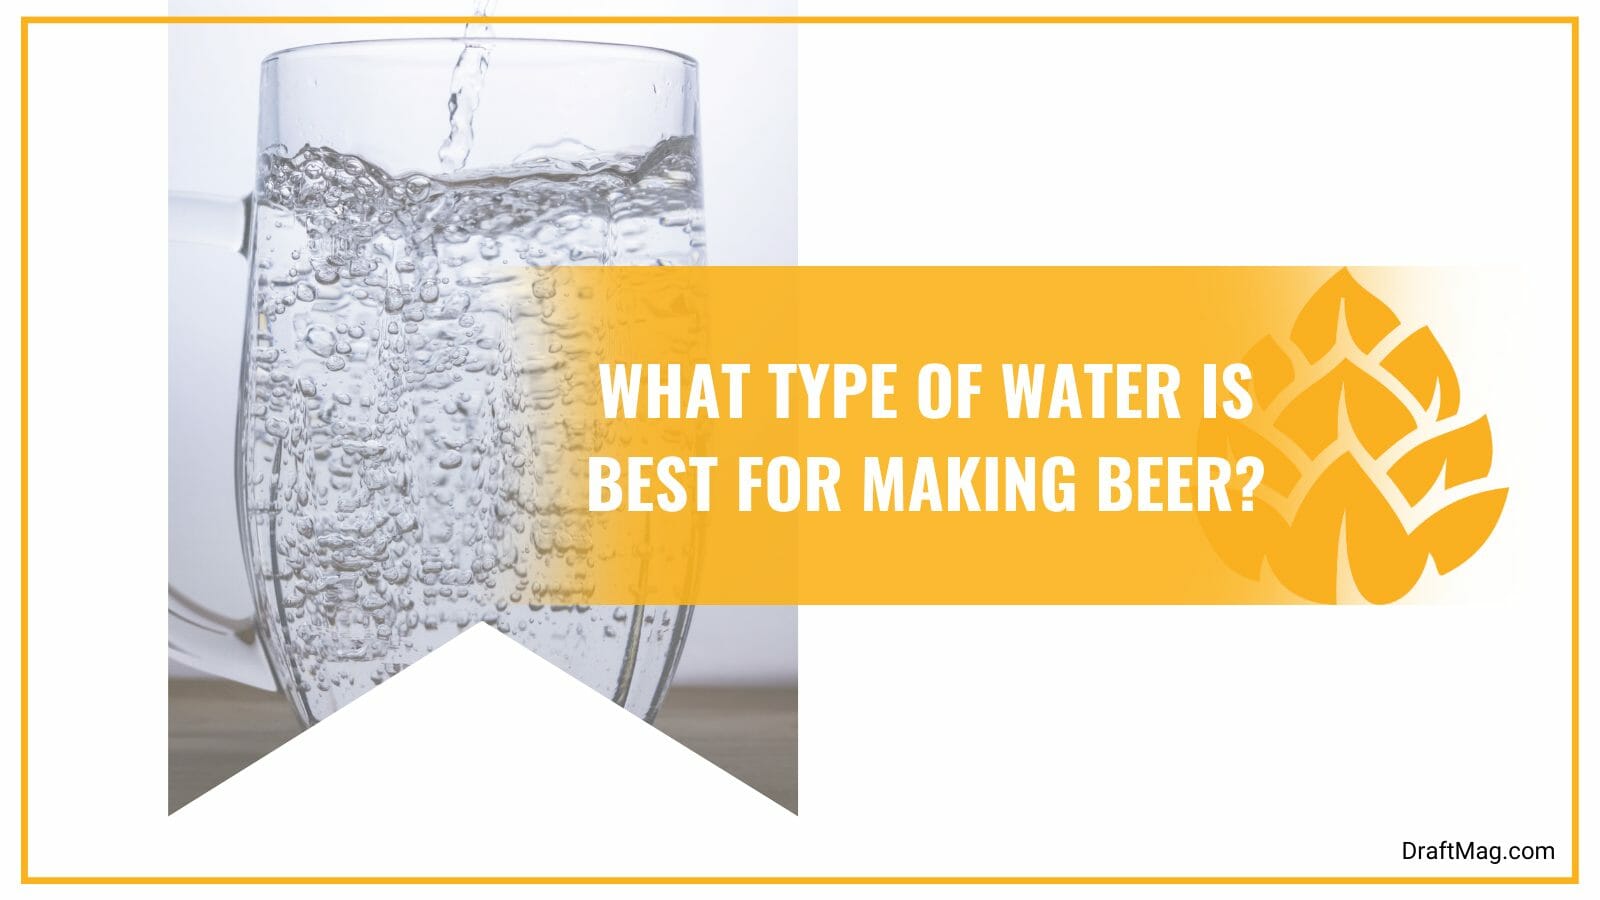 Type of water for beer